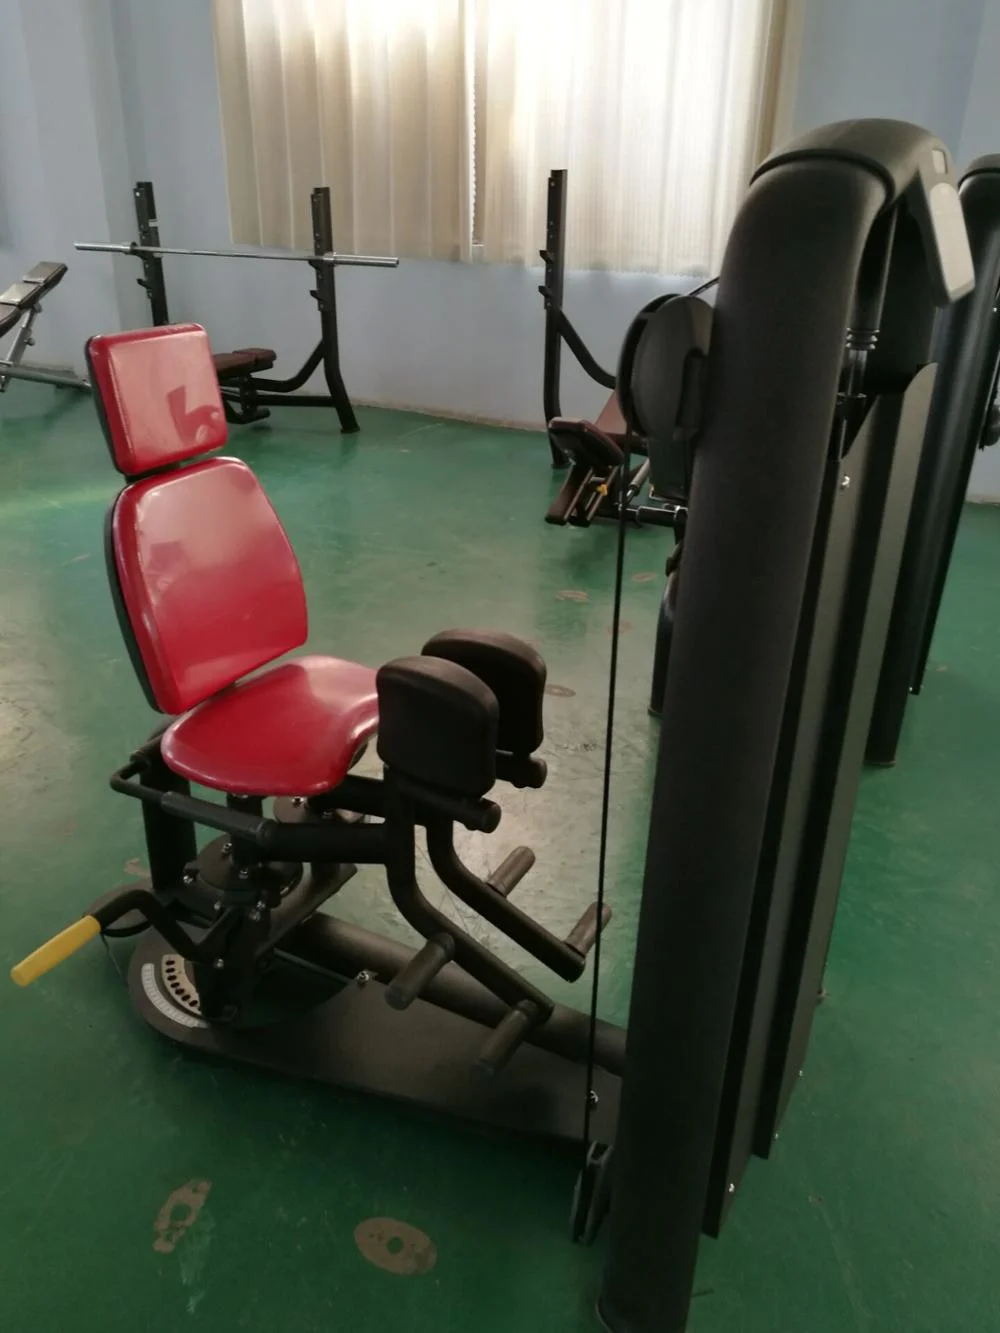 Tz-6033 Outer Thigh Abductor / Strength Fitness Equipment / Body Building Equipment